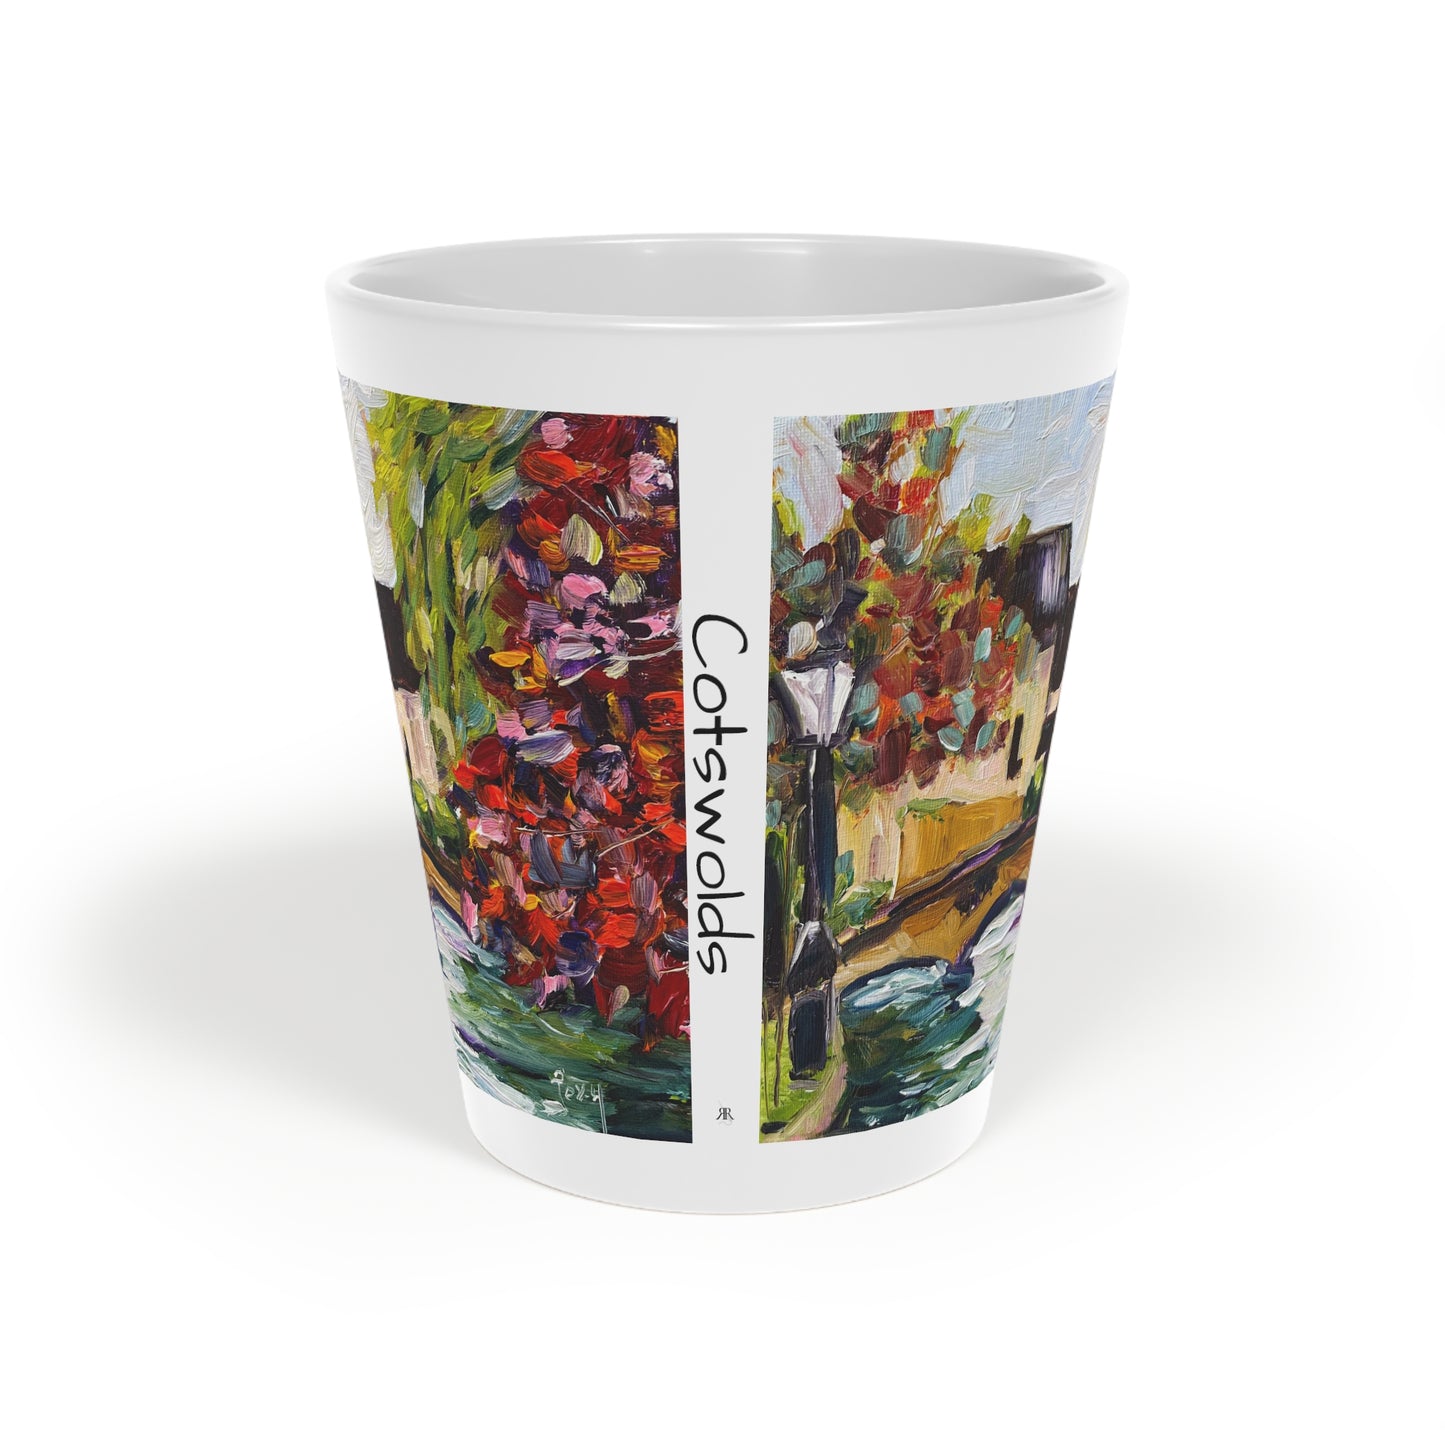 Autumn in Bourton on the Water "Cotswolds"- Latte Mug, 12oz